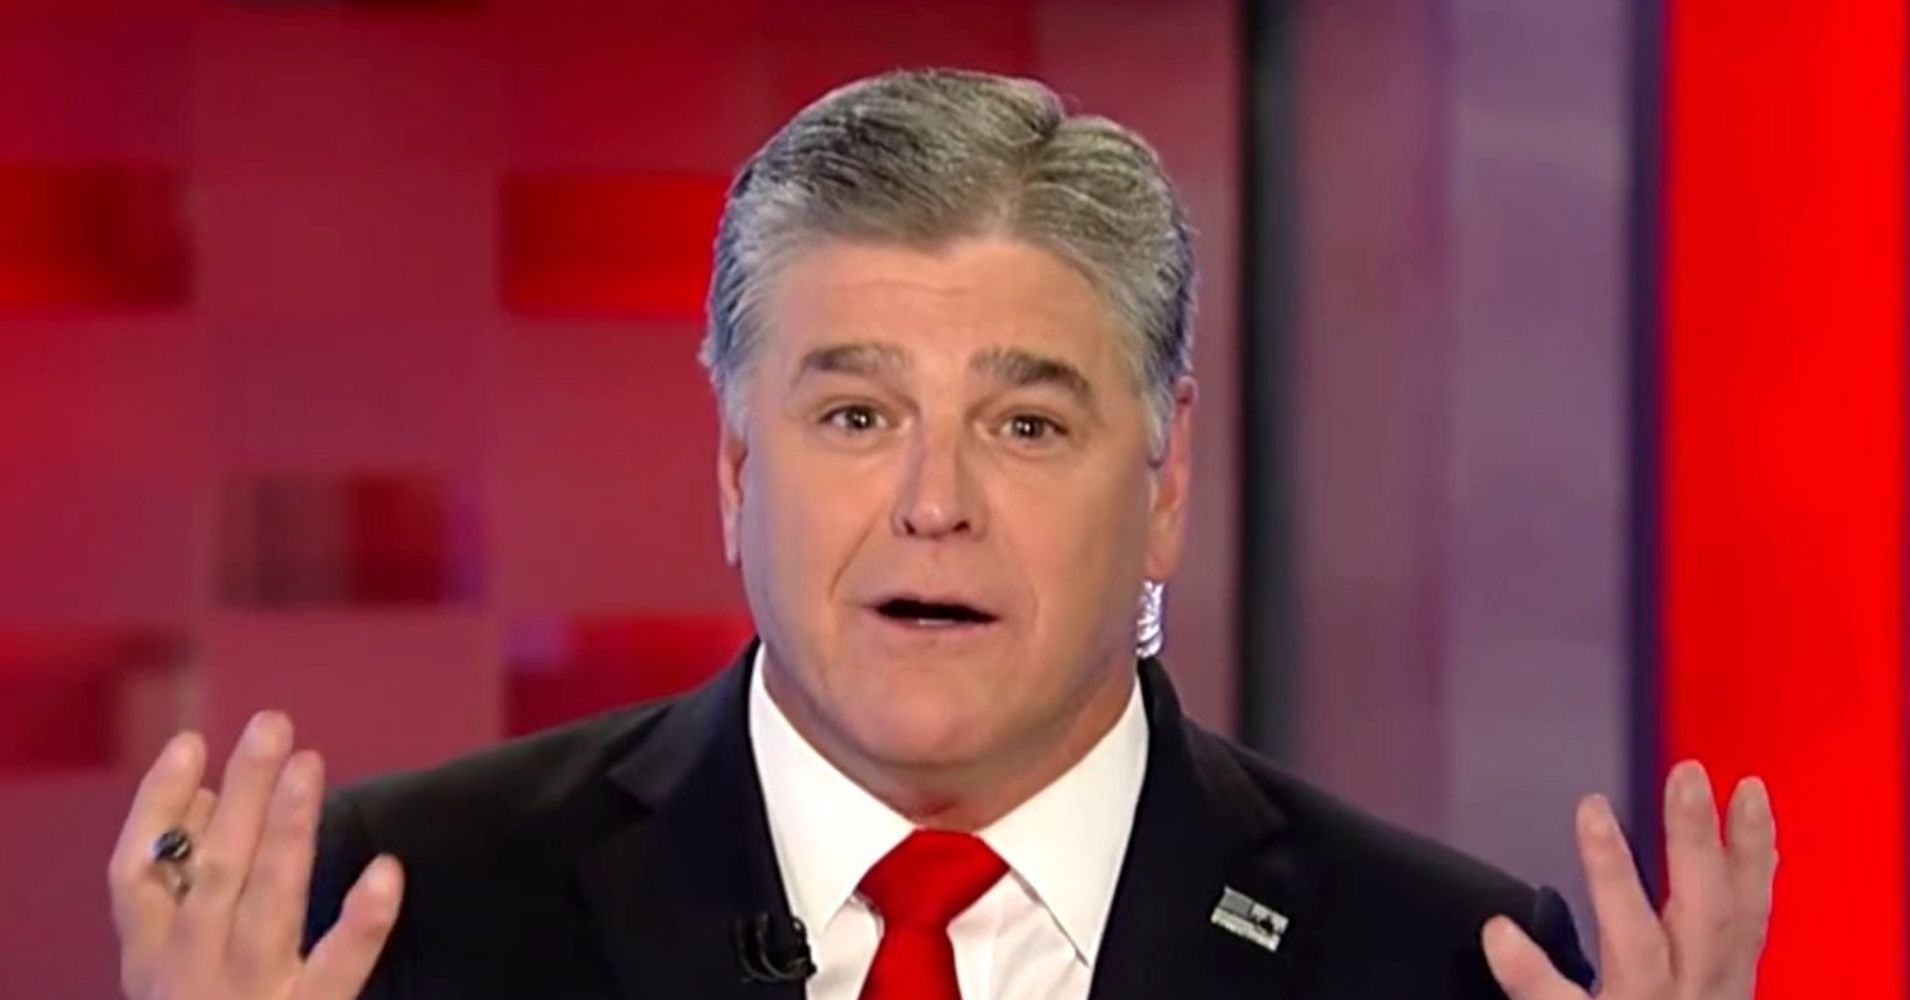 Sean Hannity's Pee Pee Tape Discussion Goes Completely Off The Rails | HuffPost